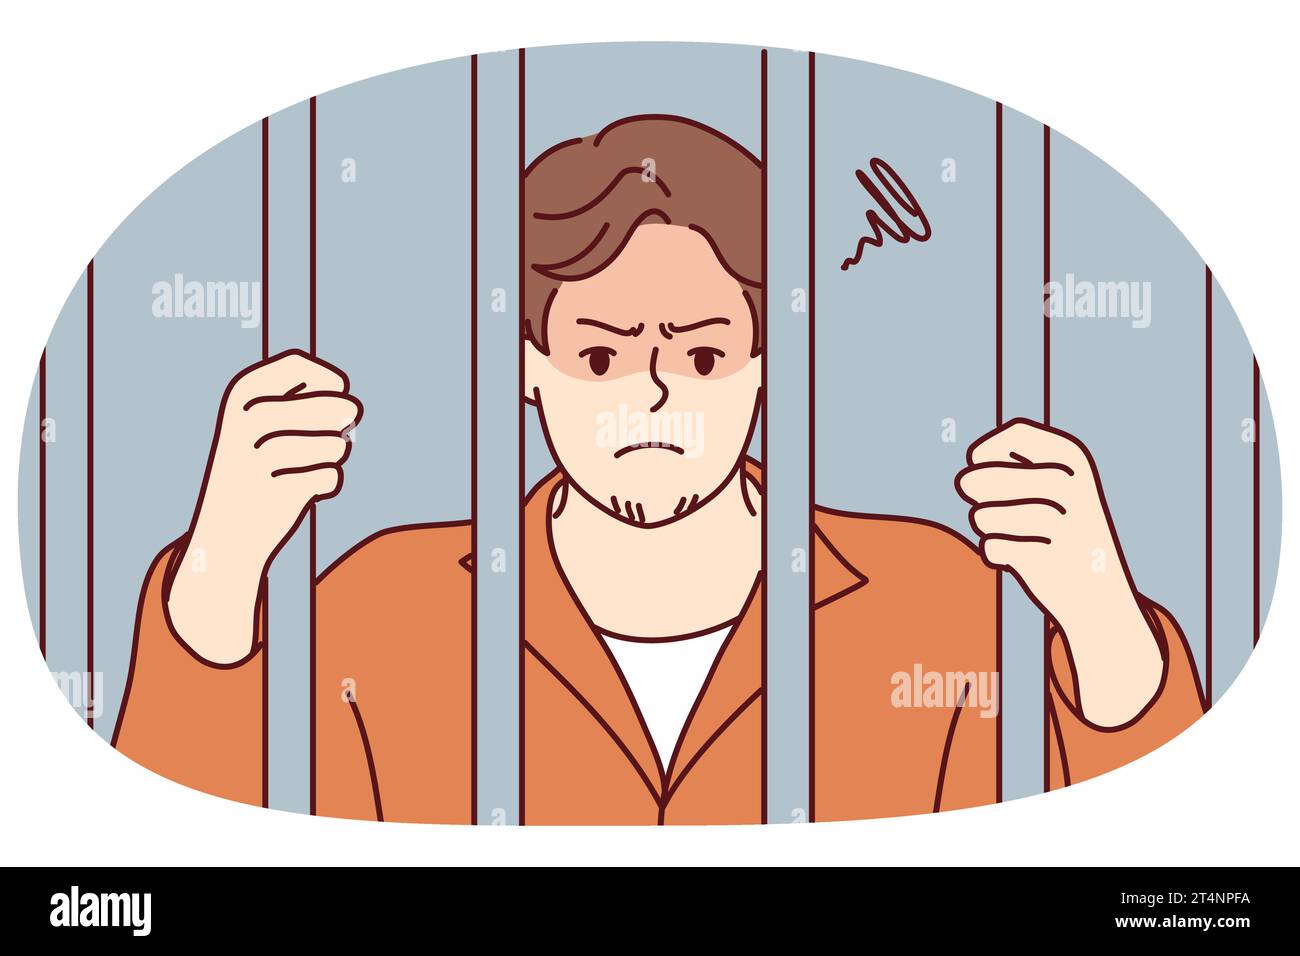 Unhappy man in robe behind bars in jail. Angry male criminal imprisoned for crime or misdemeanor. Imprisonment and sentence. Vector illustration. Stock Vector